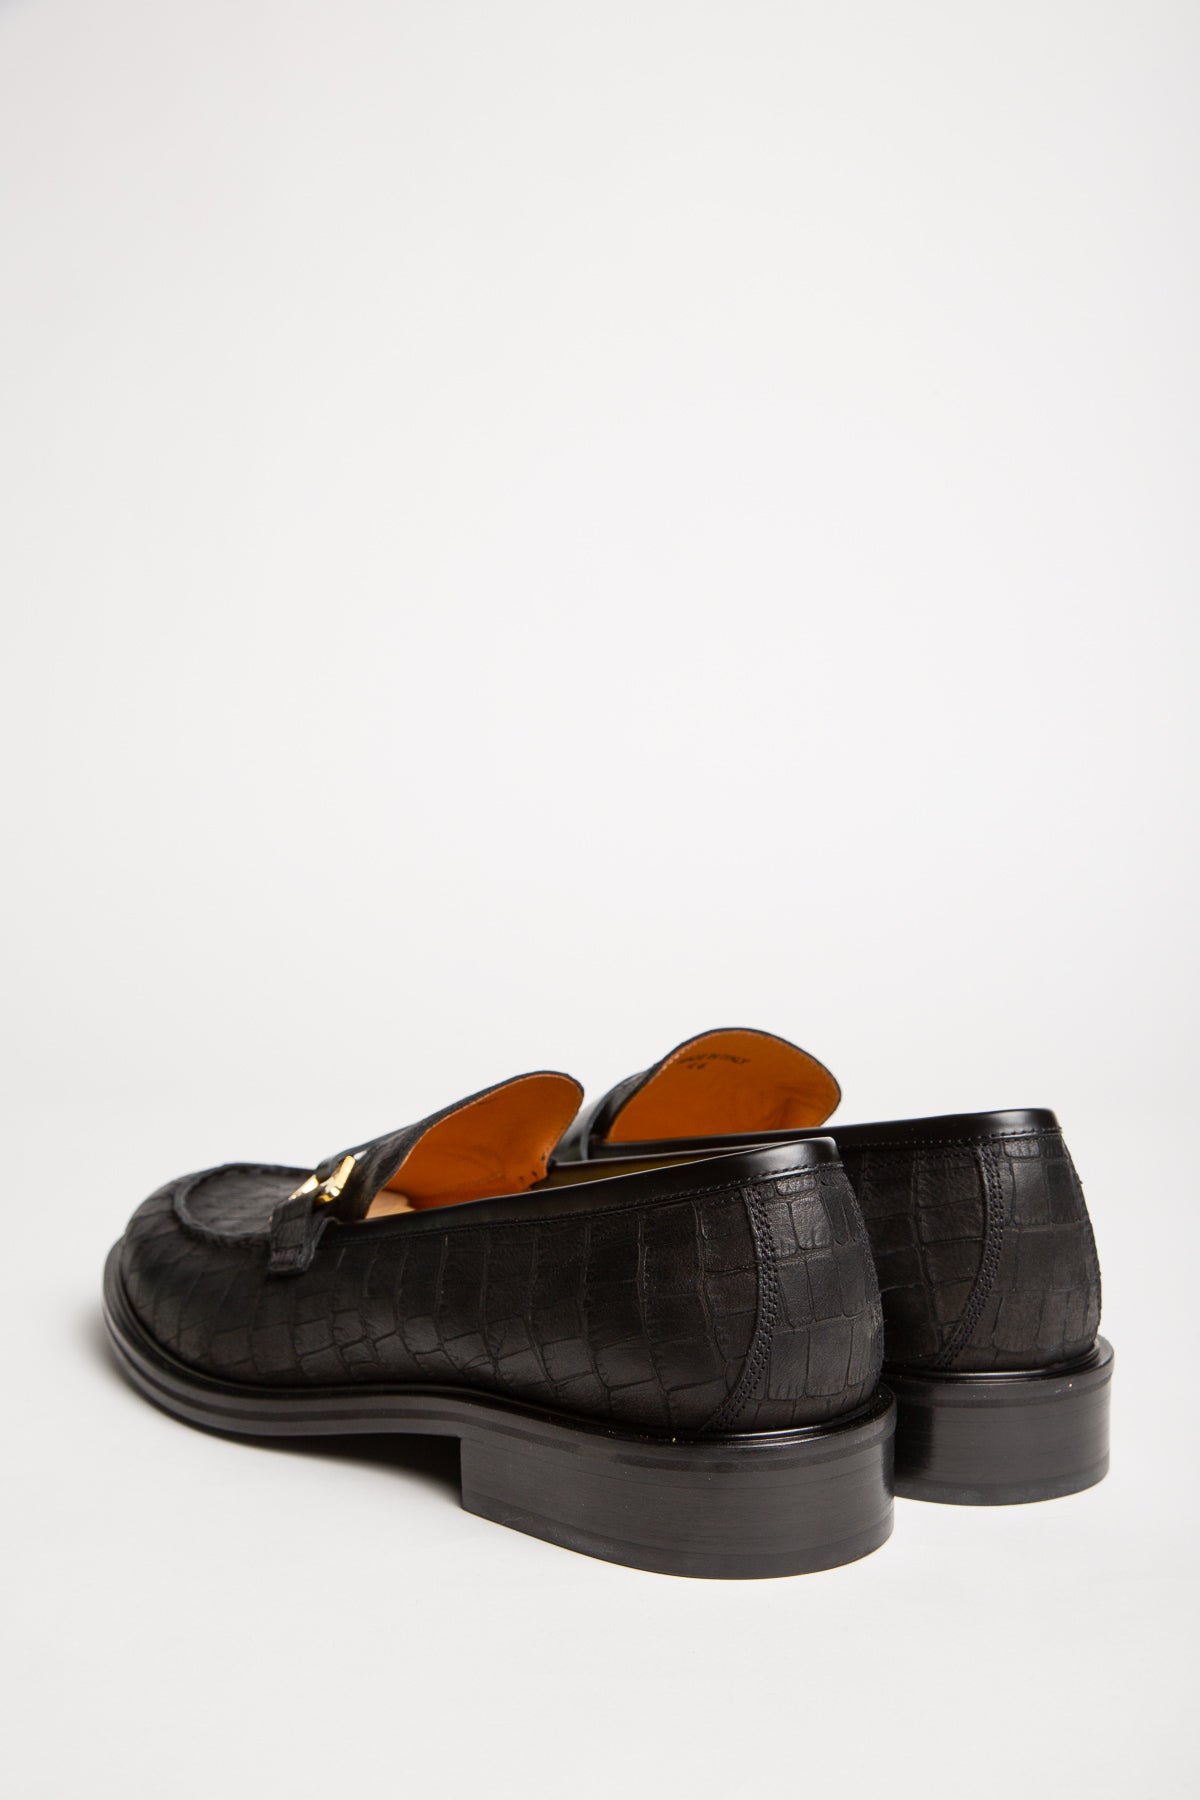 OFF-WHITE | BLACK CROC-EMBOSSED LOAFERS